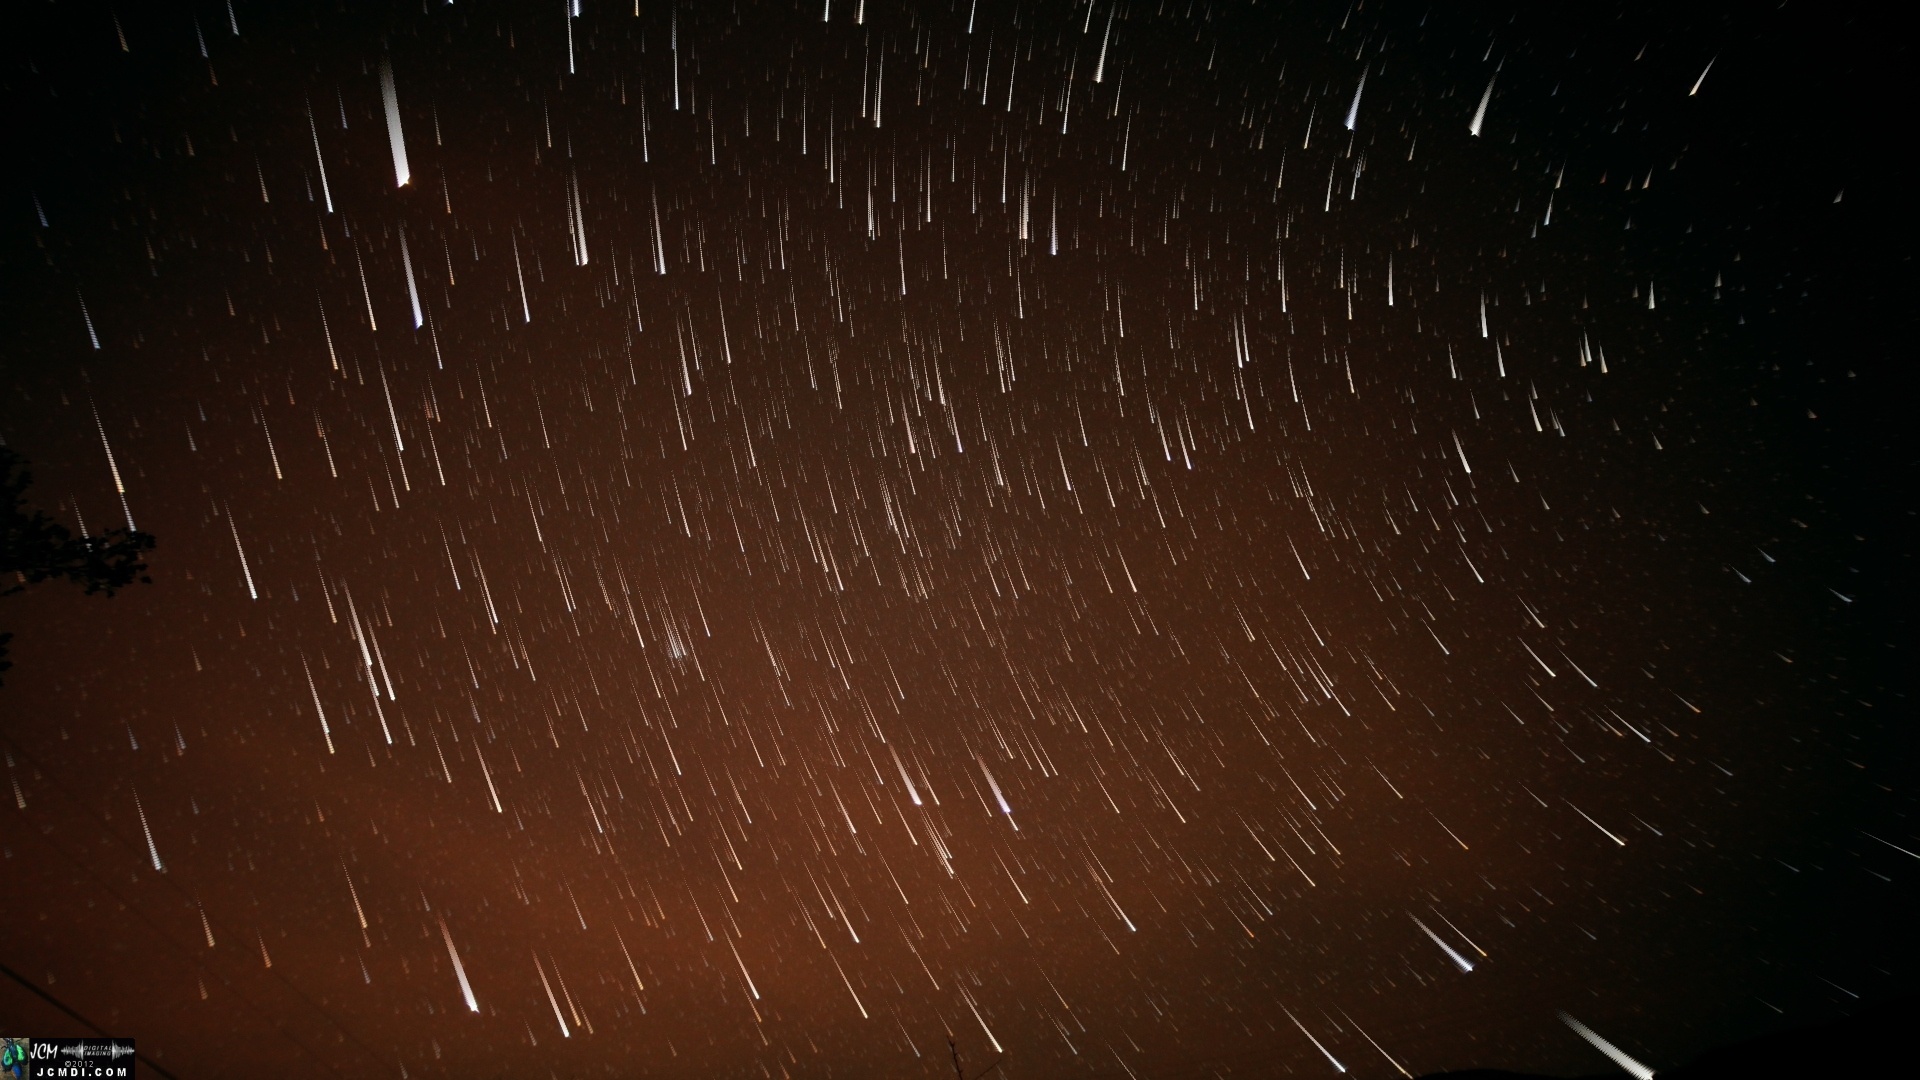 20mm all night star spin cloudy (Composited)